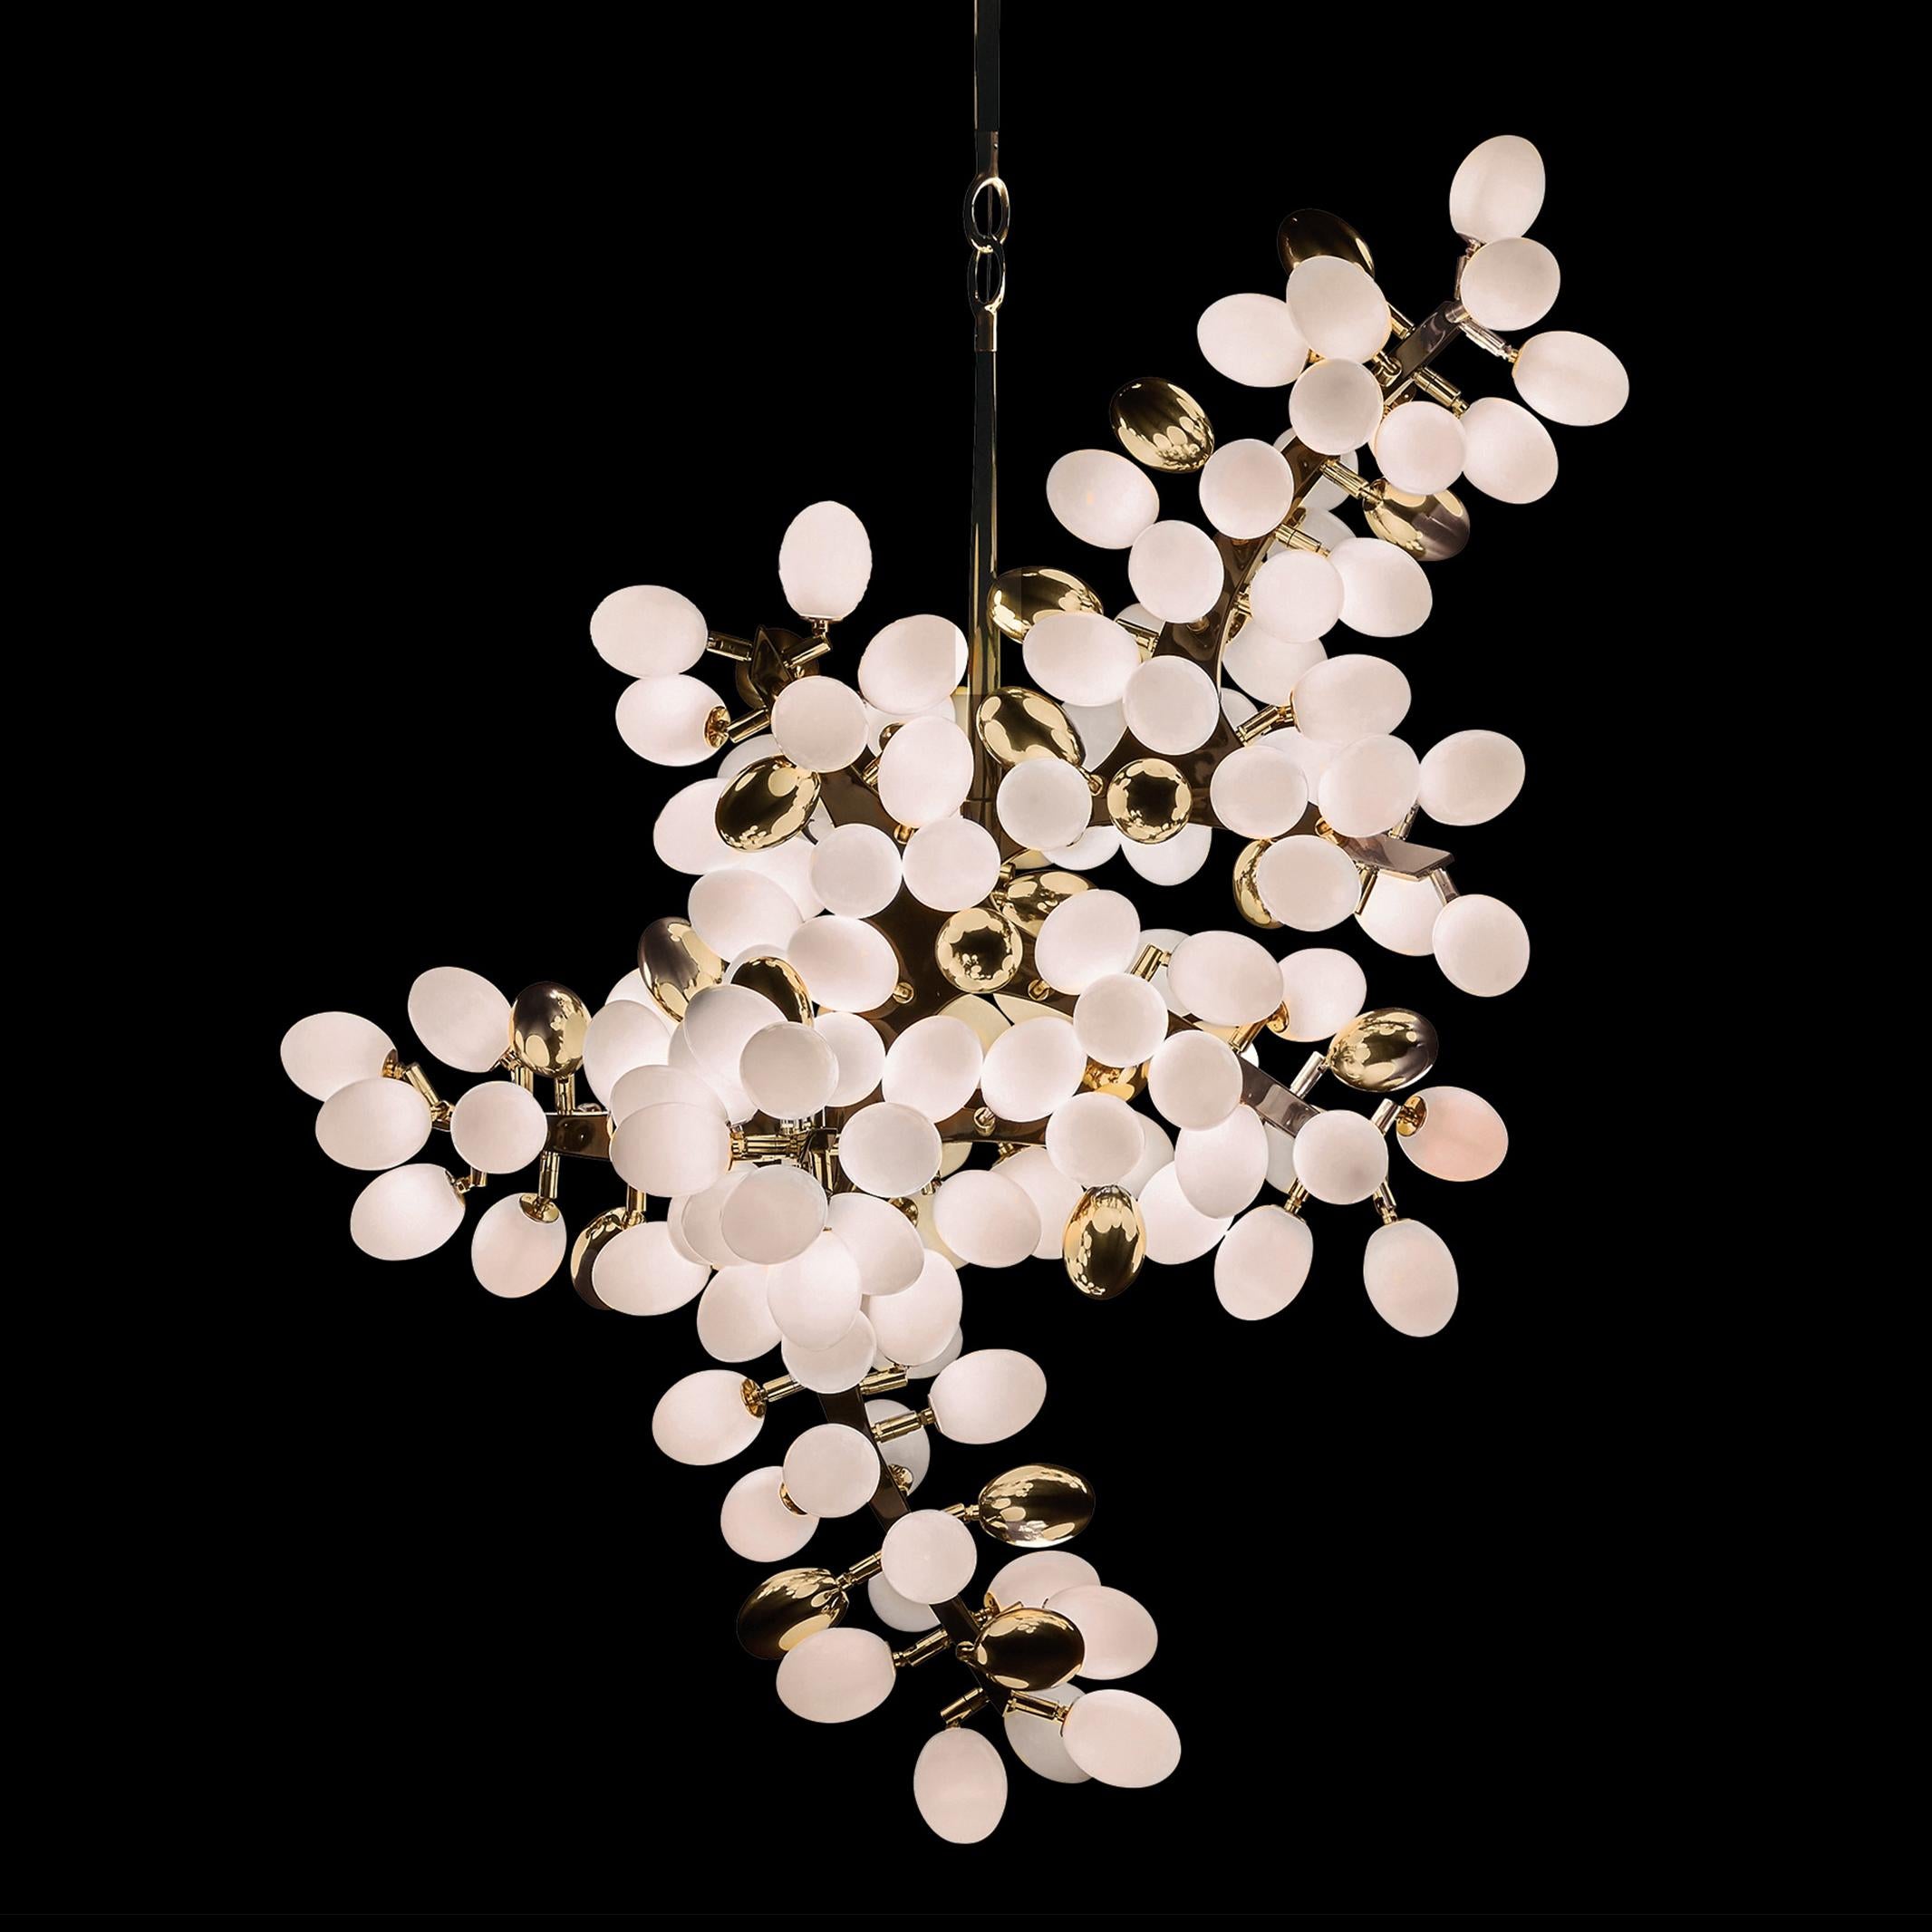 The spectacular Valiant Chandelier by Barlas Baylar is inspired by the resplendent natural forms of ancient flora.  The Valiant Collection is rigorously crafted in hand-blown Murano glass and solid sculpted bronze (or stainless steel.)

With a